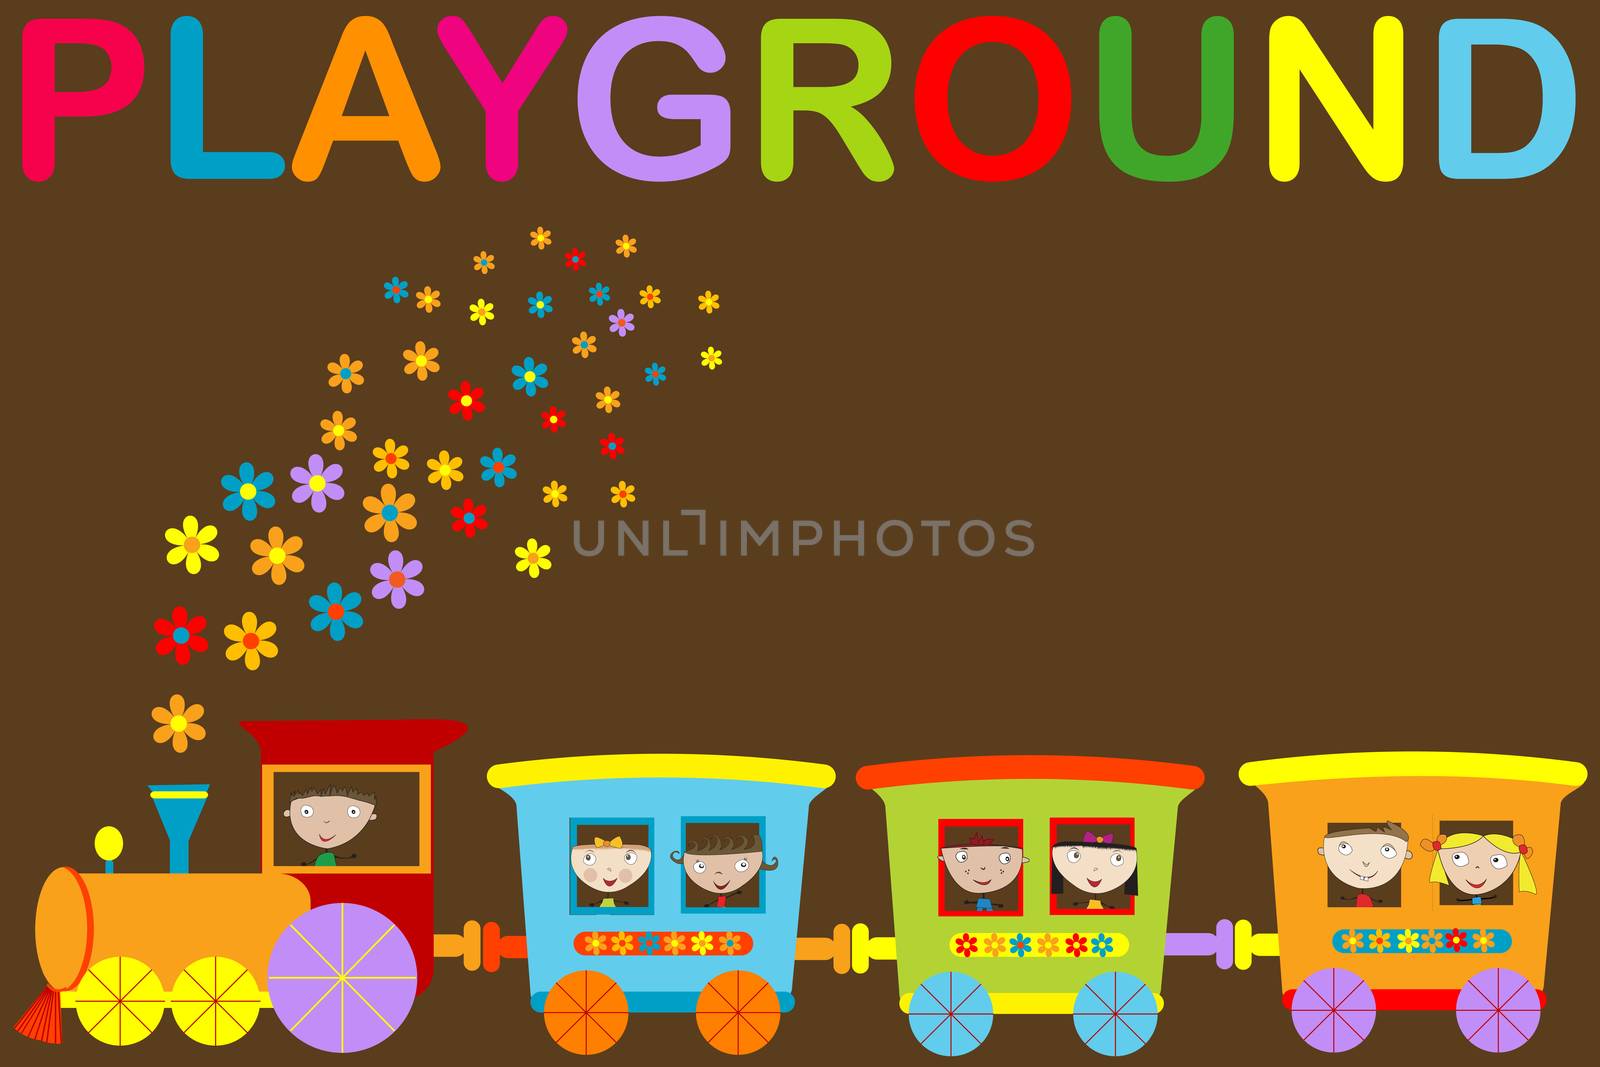 Playground announcement with cartoon train